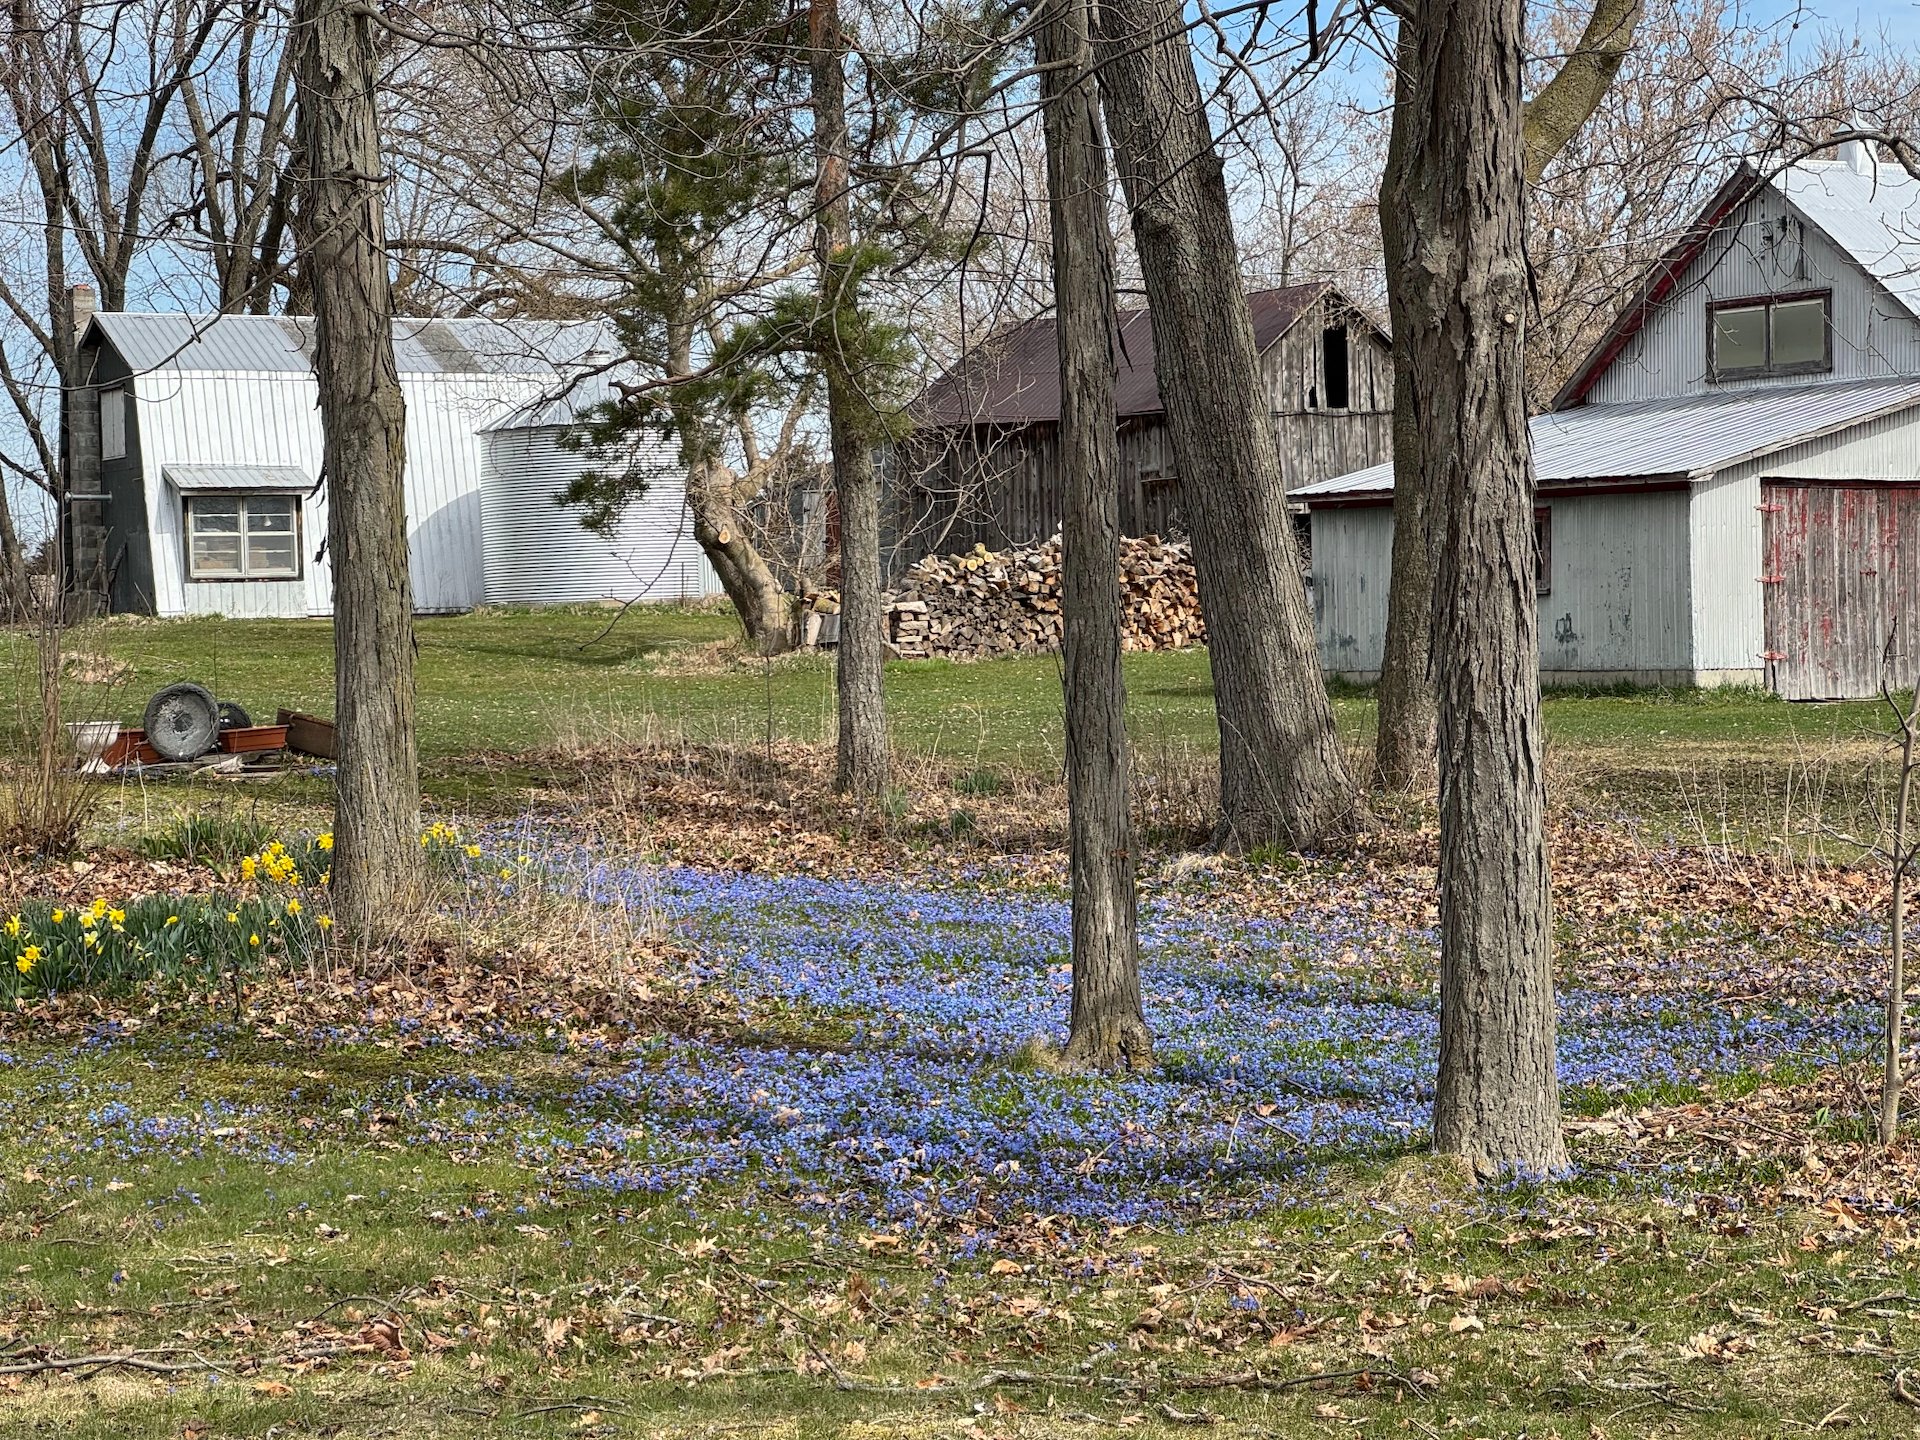  These small blue flowers seem to be creeping across the lawn. So nice in the spring.  